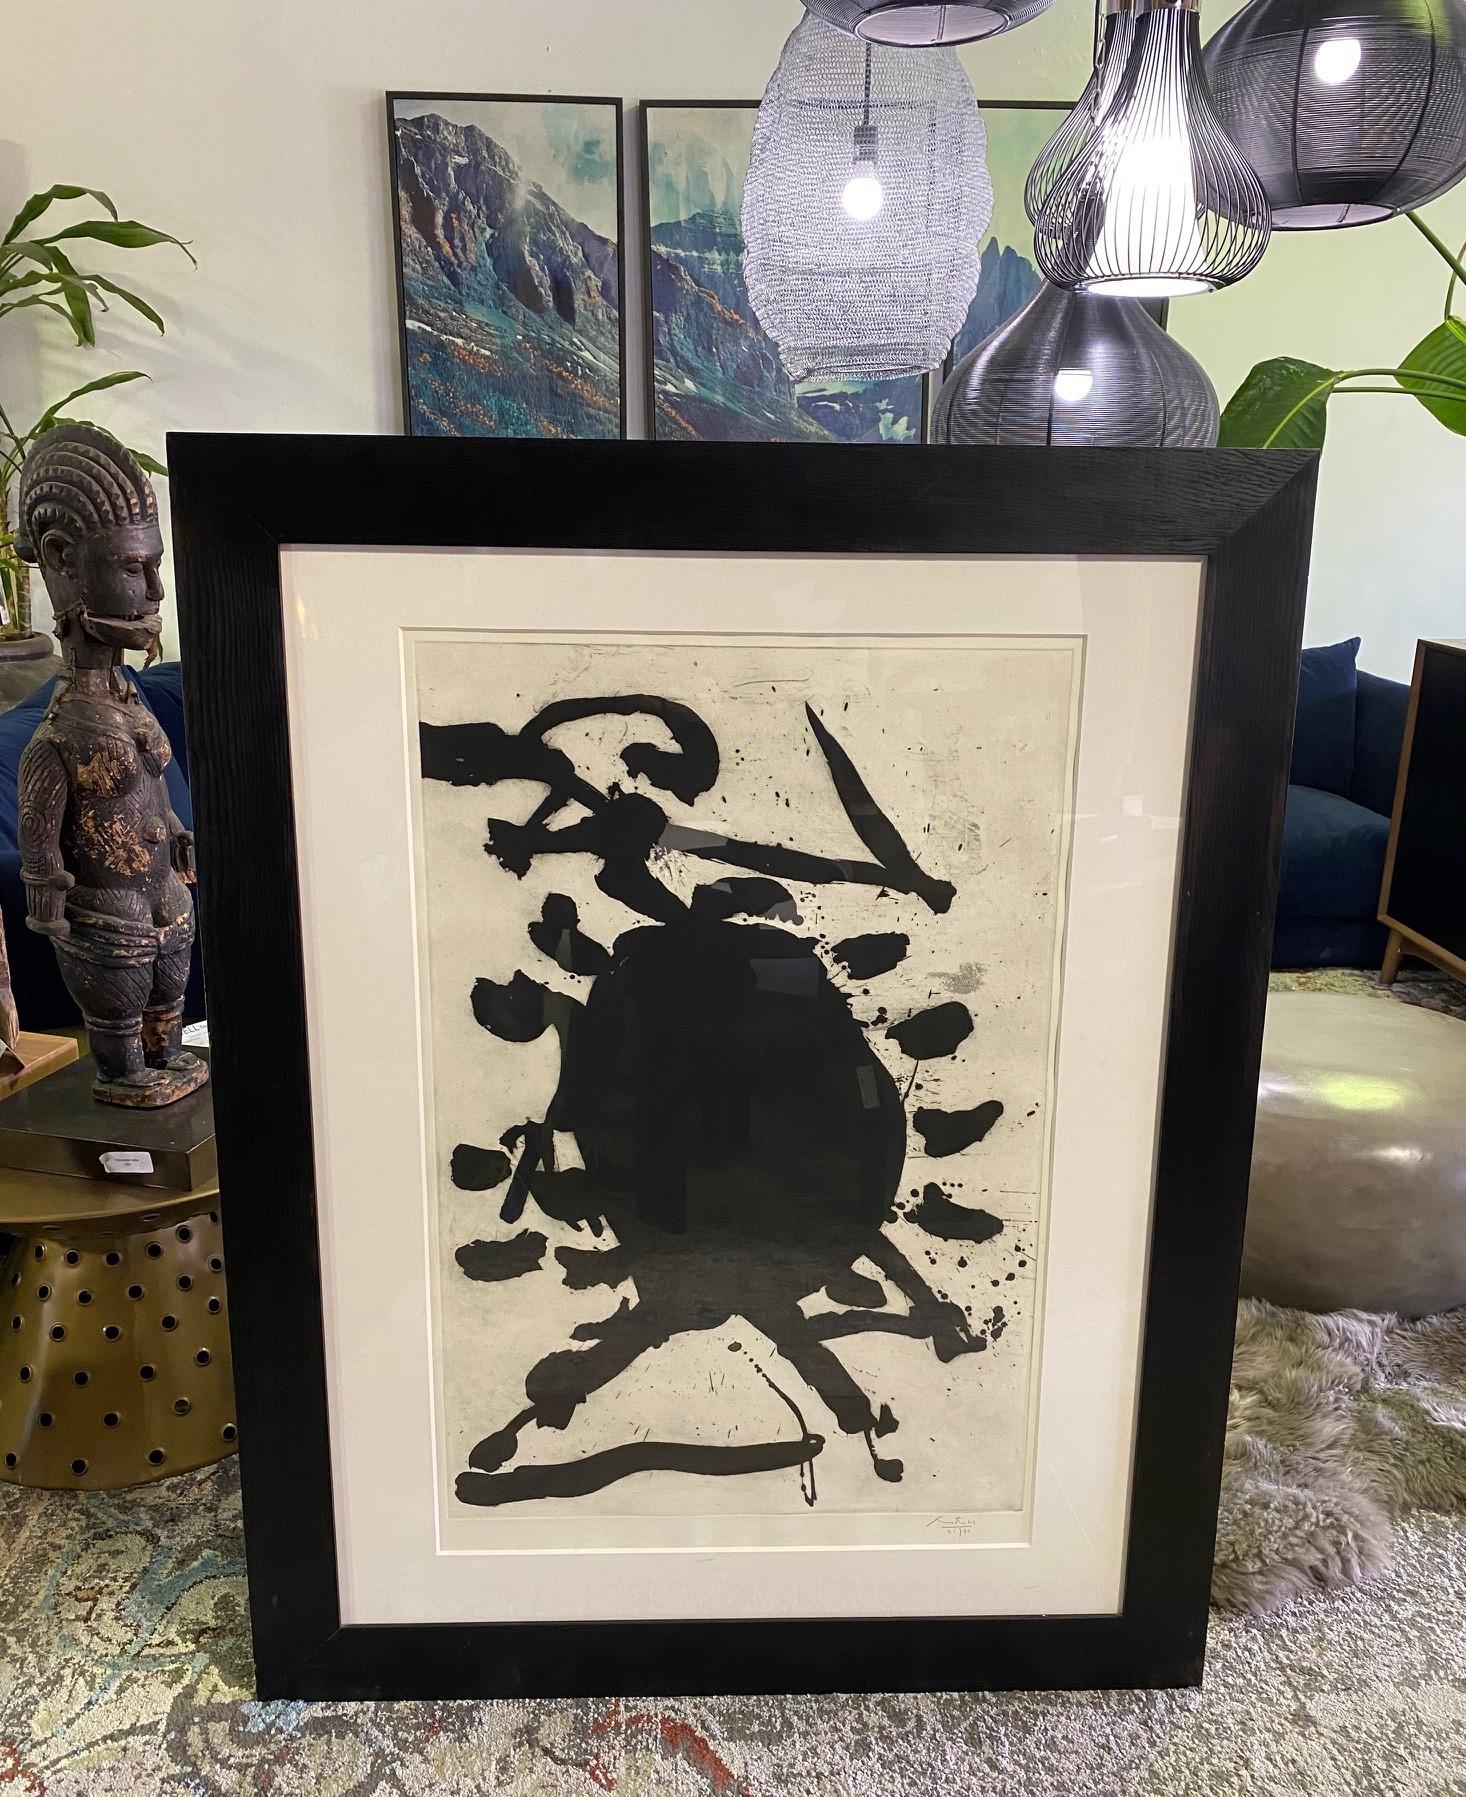 A breathtaking, large in scope and scale, rivetting work by American abstract expressionist painter, and master printmaker Robert Motherwell (1915-1991). 

This aquatint/lift ground etching, done in 1984, is titled 